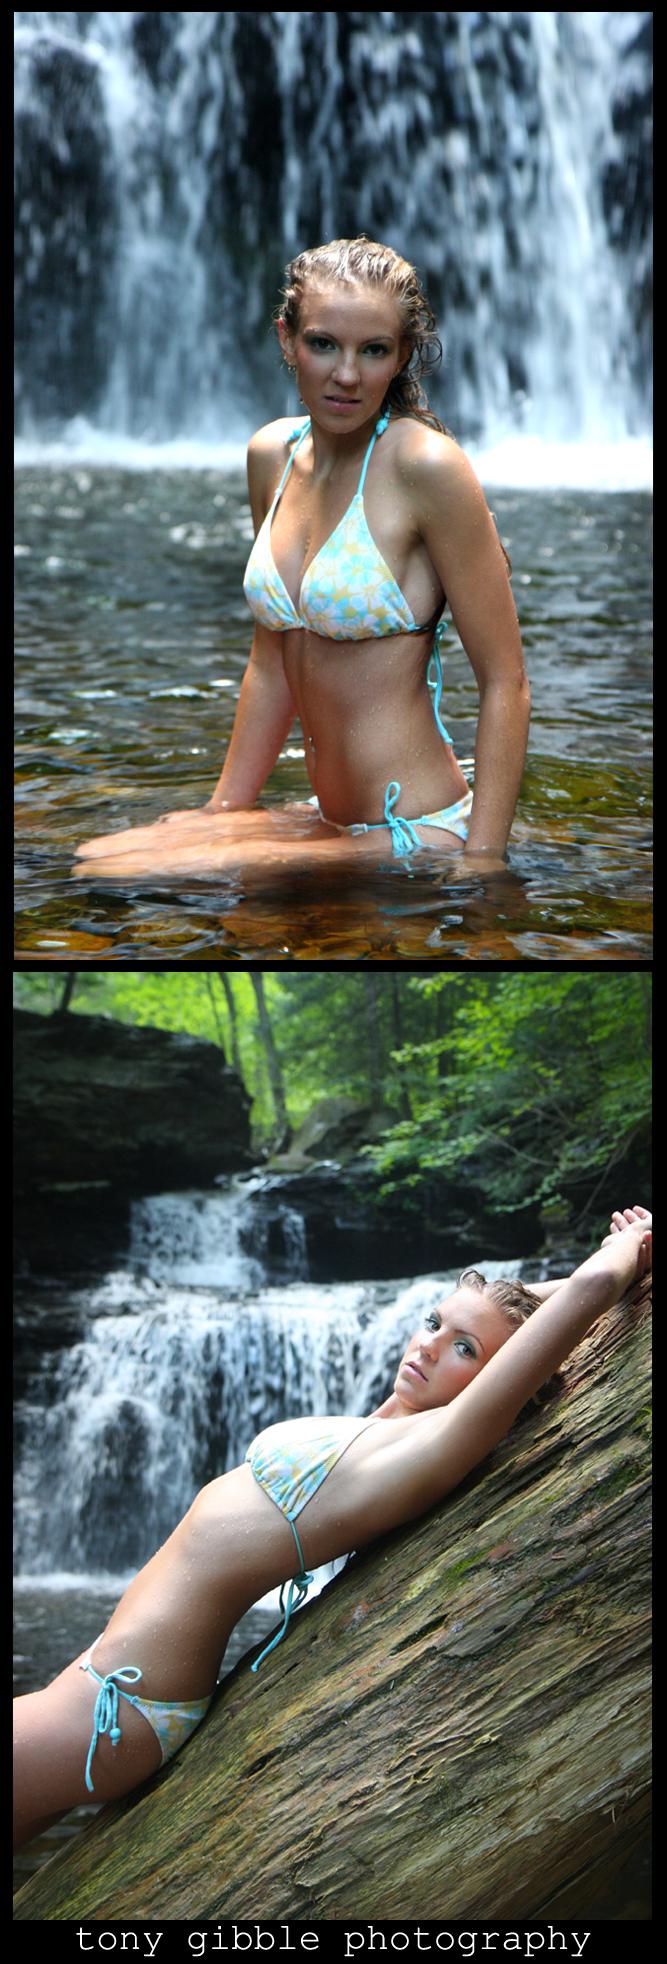 Male model photo shoot of tony gibble photography in Waterfall Shoot June 29th, makeup by Stacey Steffes